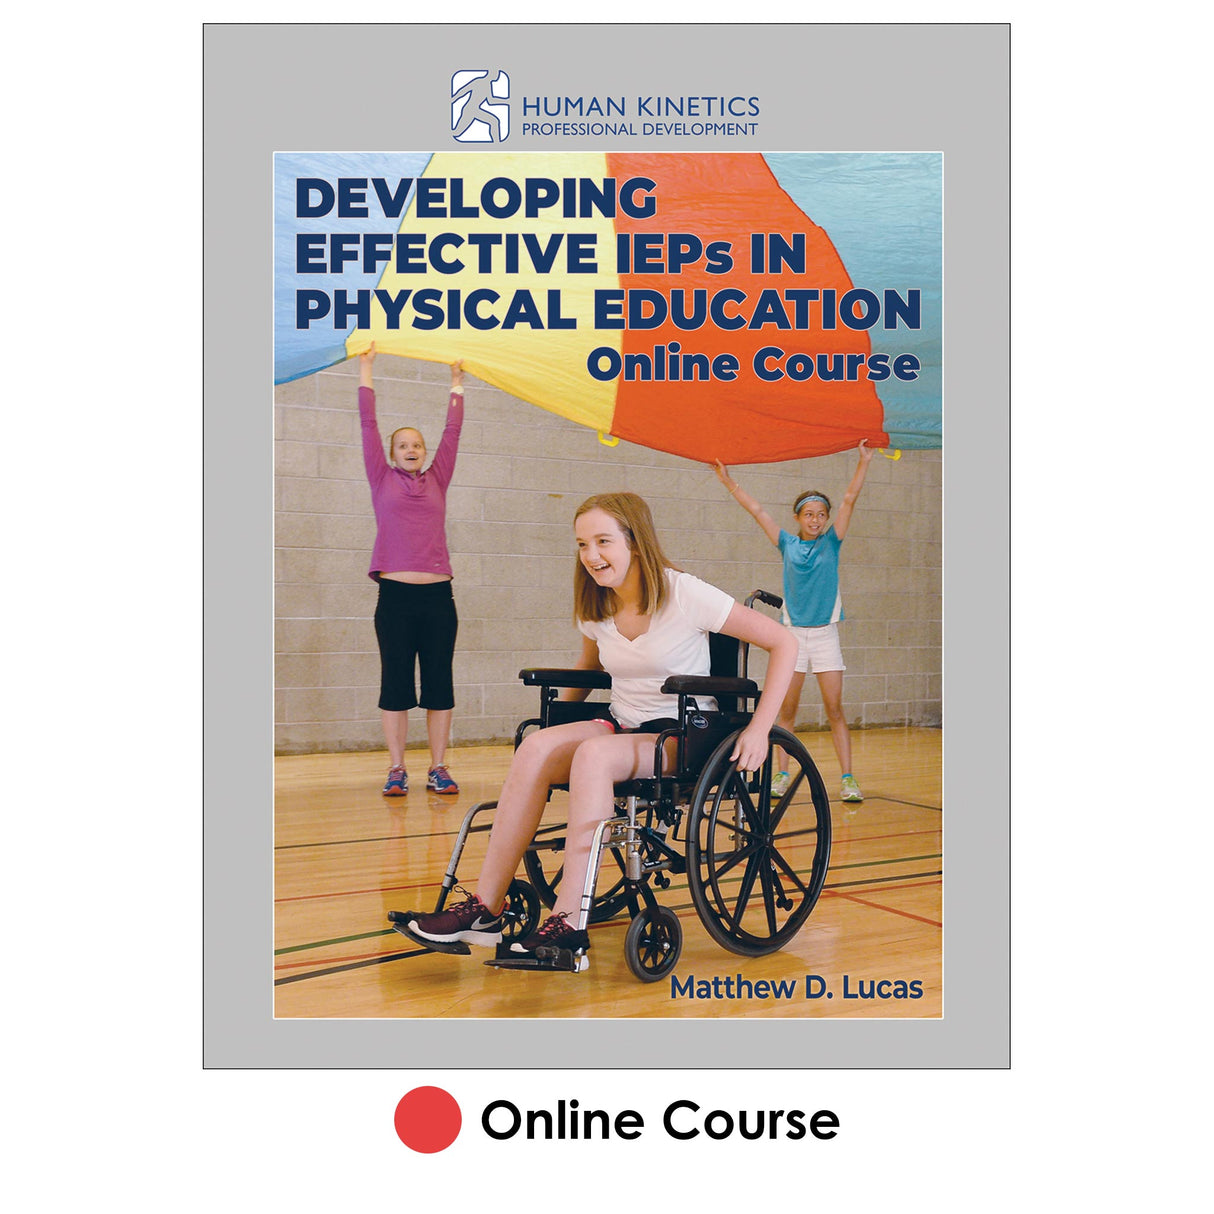 Developing Effective IEPs in Physical Education Online Course